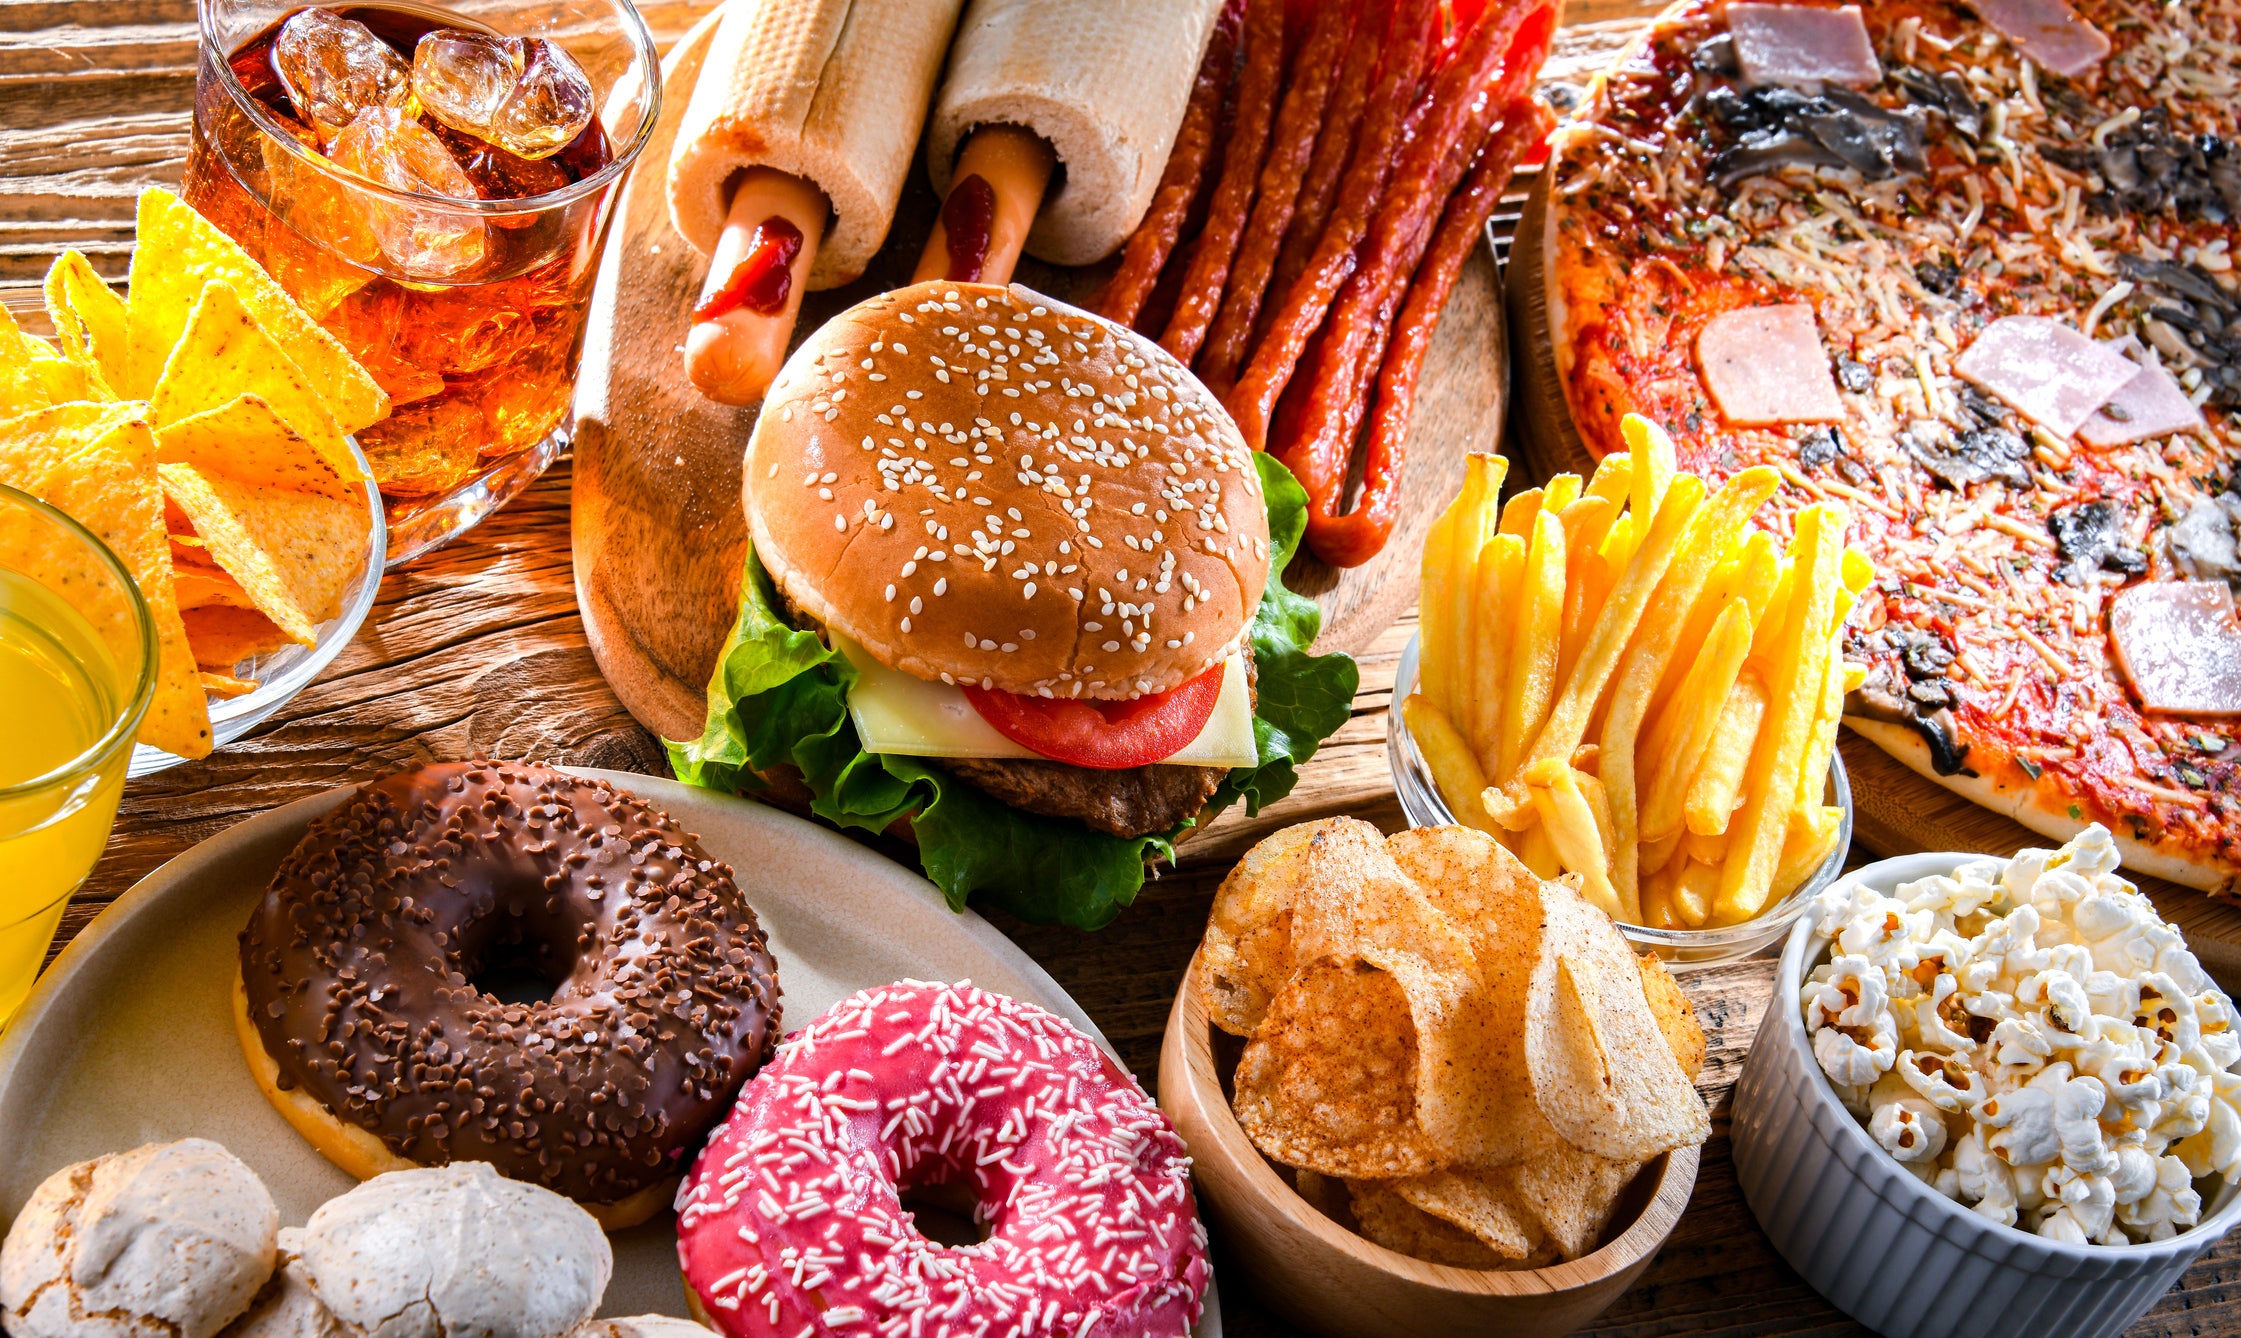 Study Links Ultraprocessed Foods to Health Risks in Children and Adults